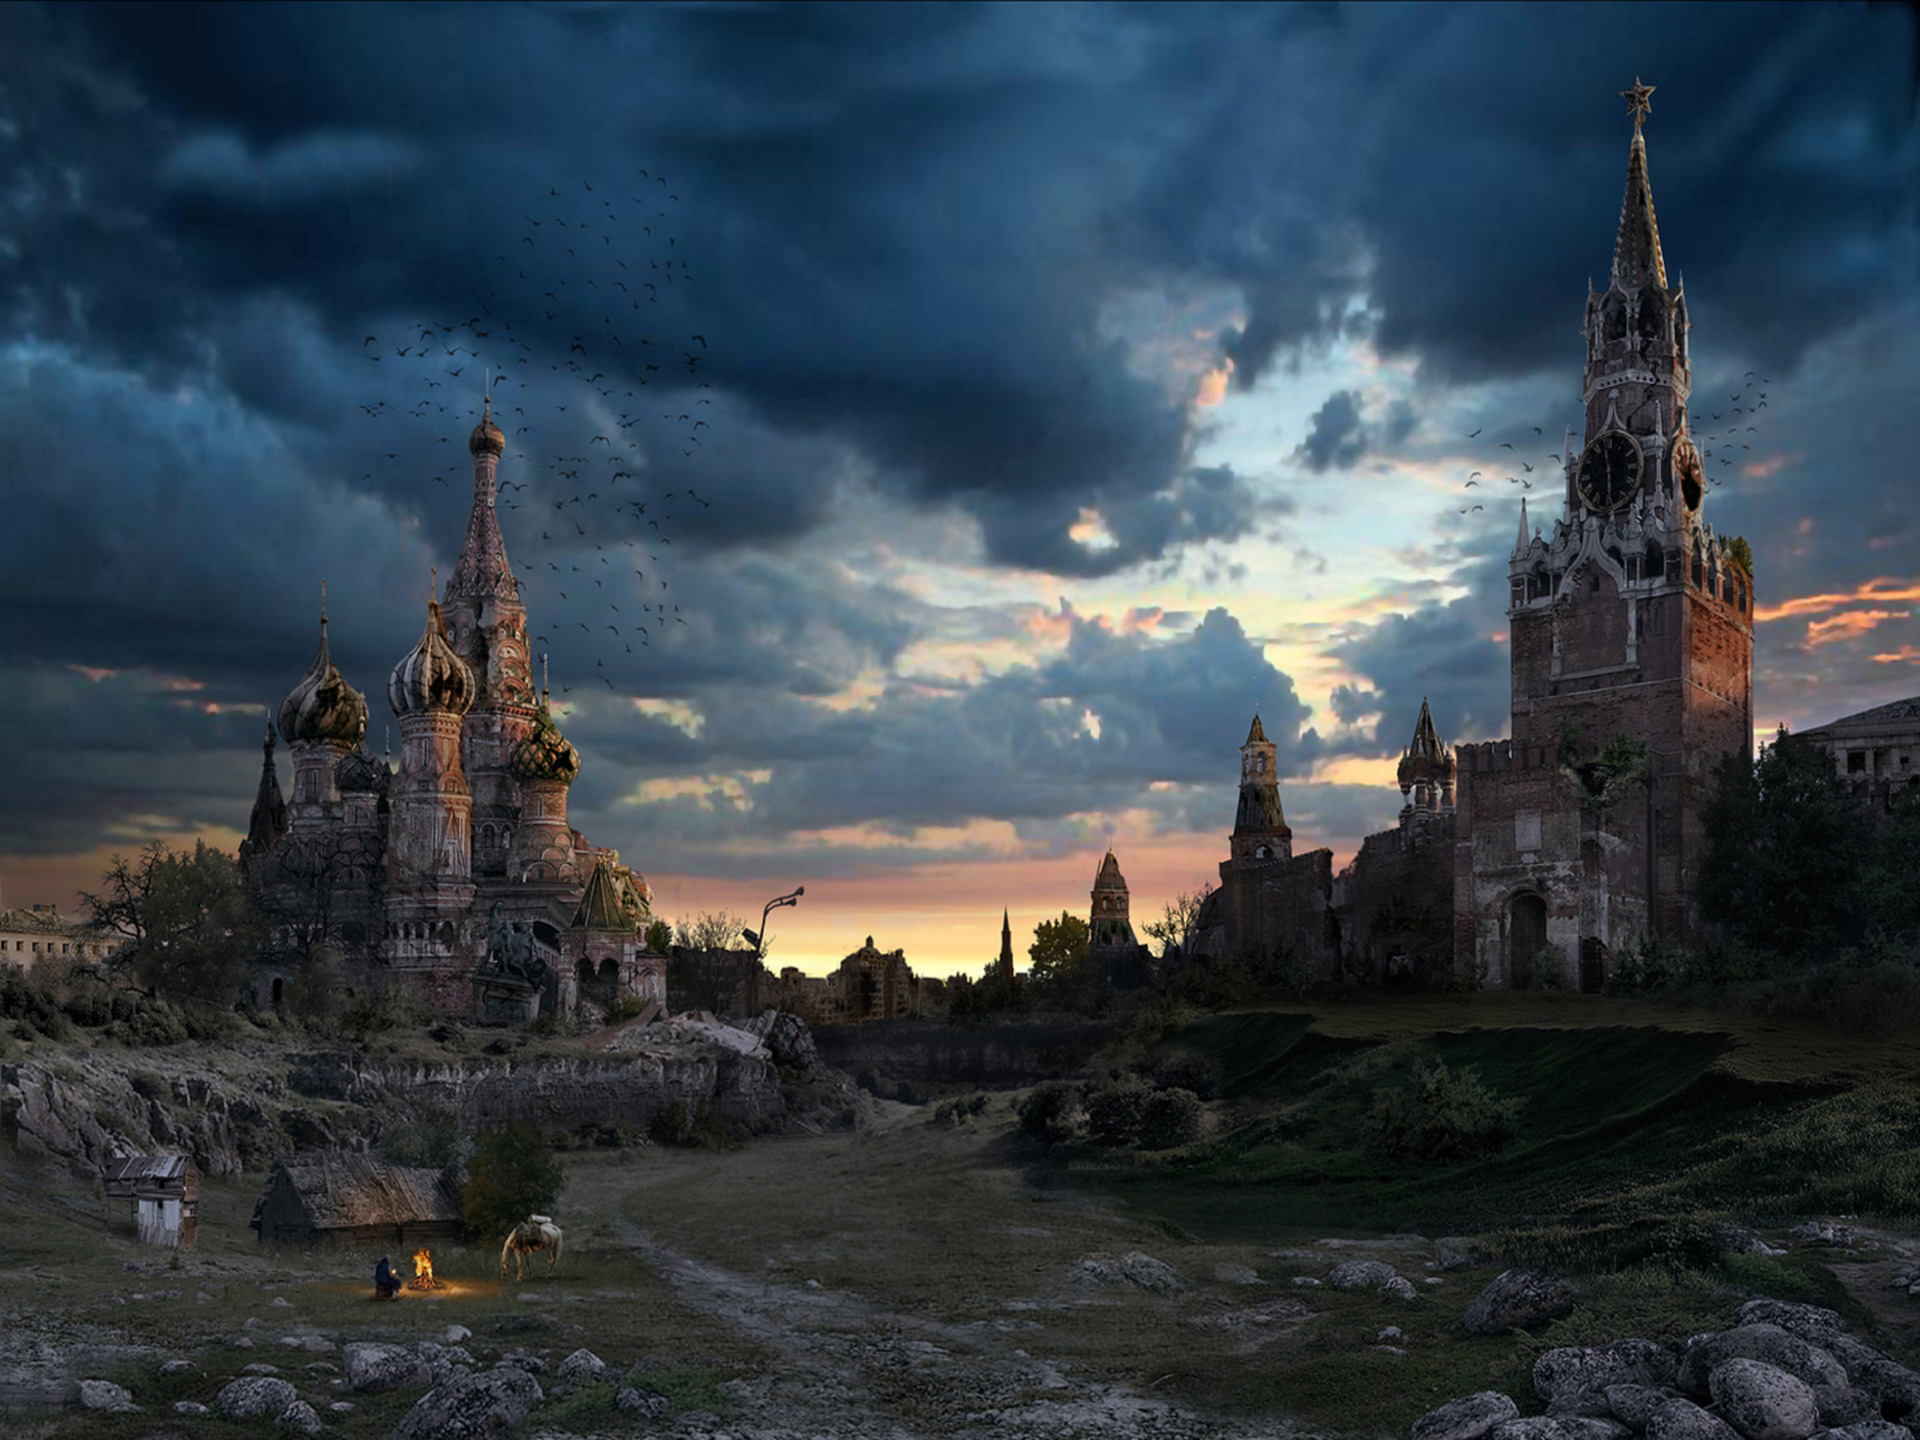 artwork, Apocalyptic, Ruins, Building, Church, Moscow, Russia, Science fiction Wallpaper